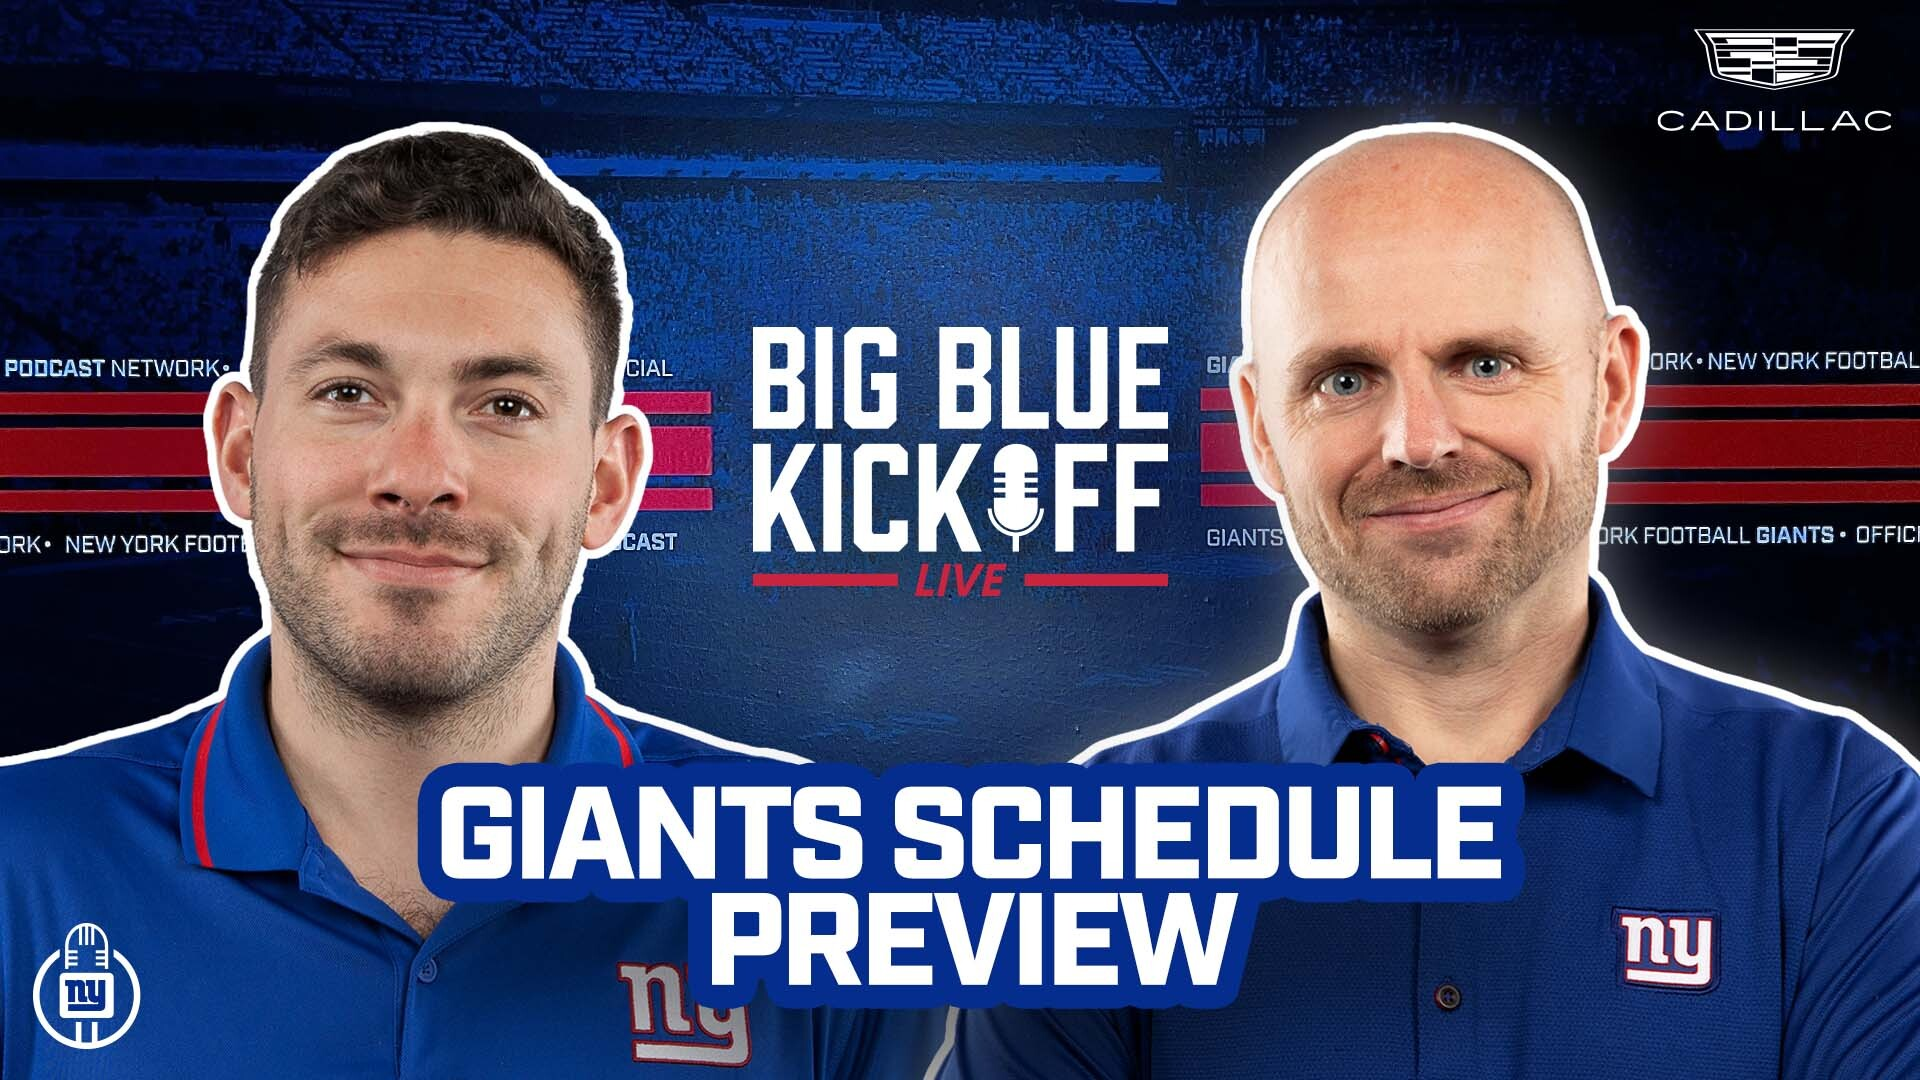 Big Blue Kickoff Live 5/22 | Giants Schedule Preview